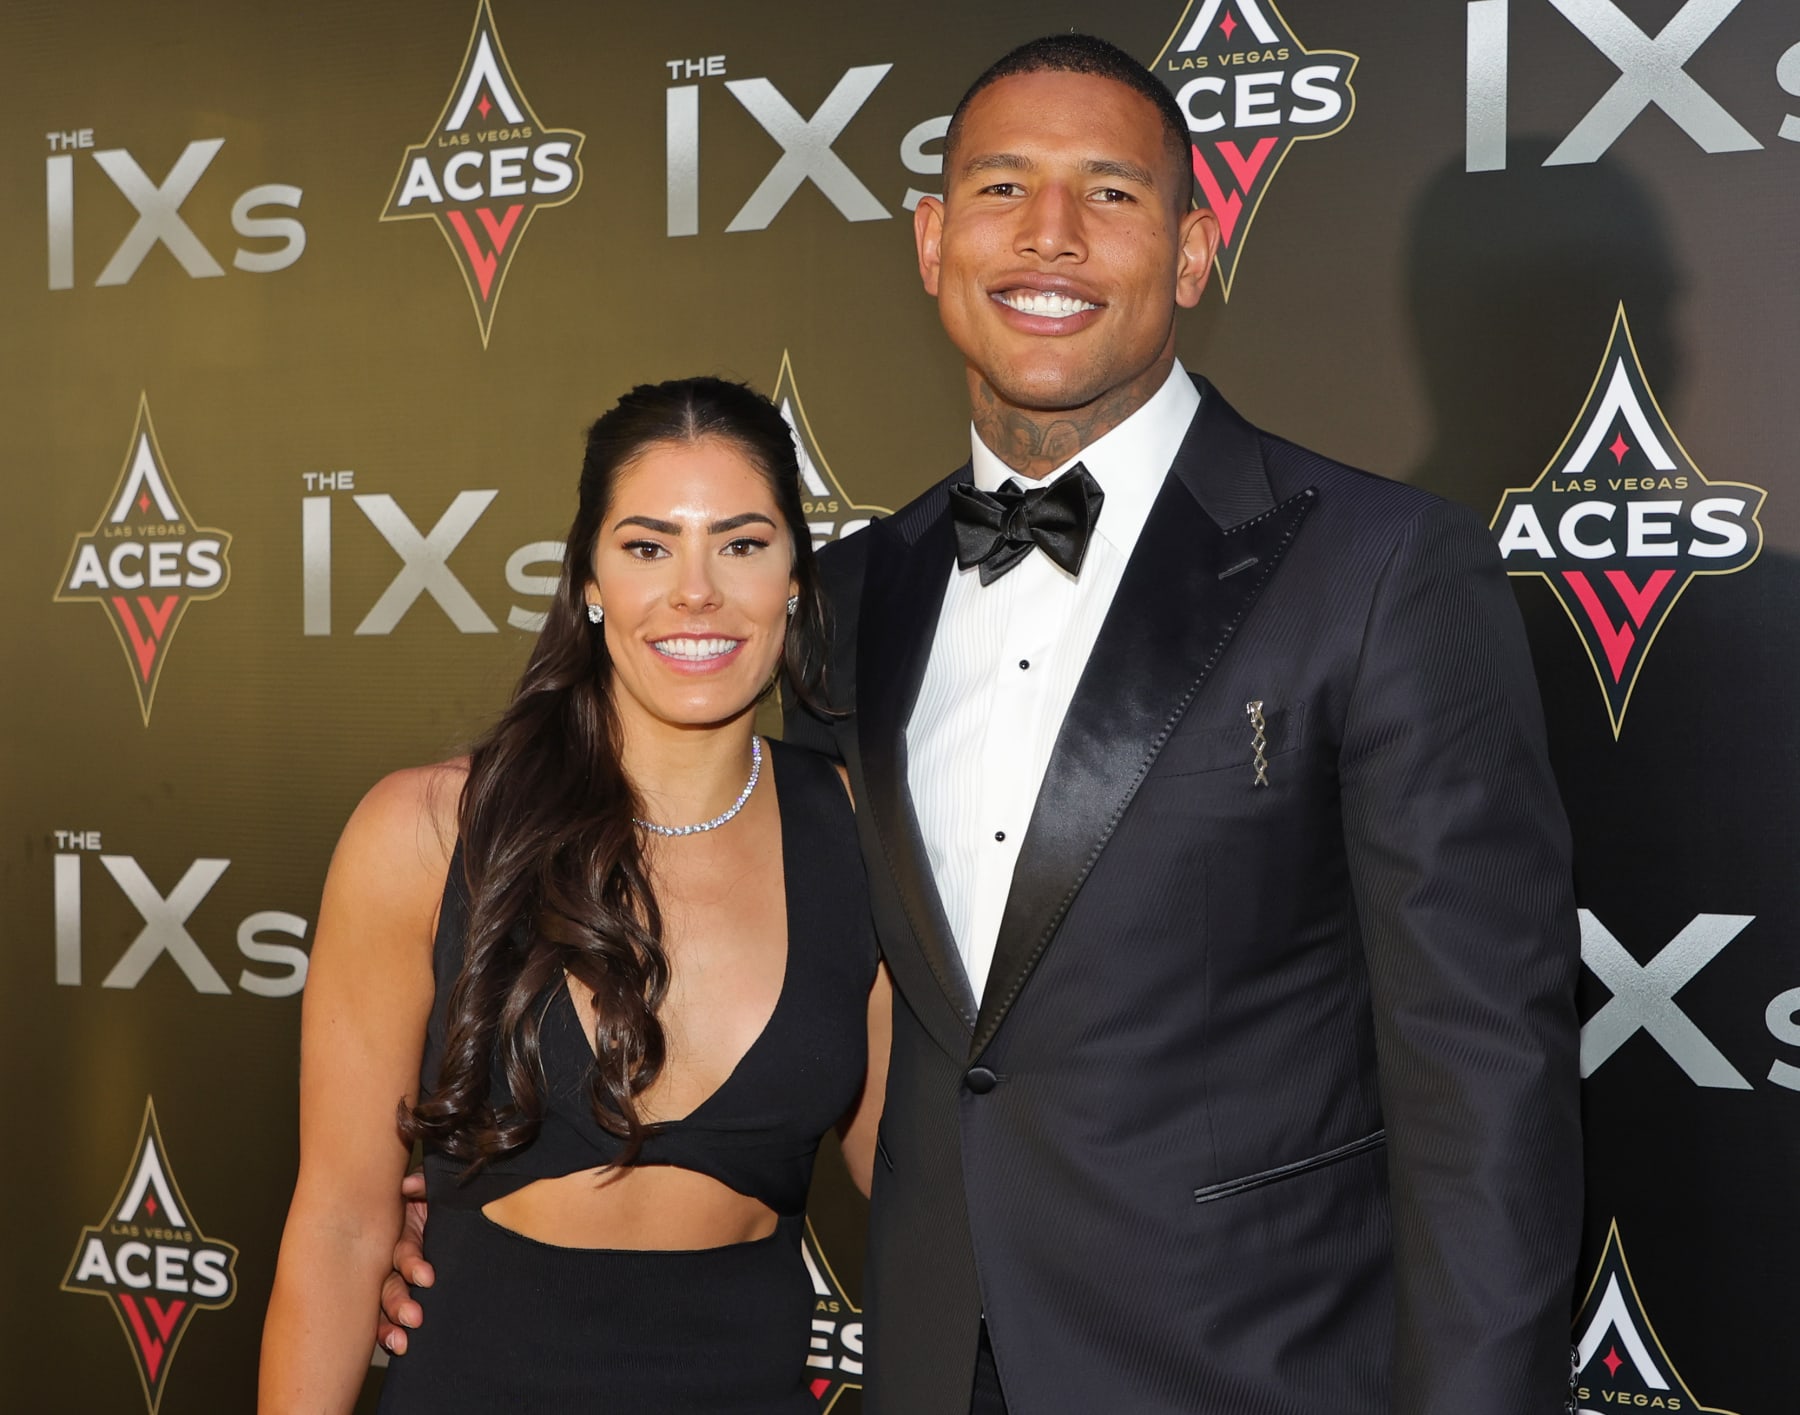 Aces' Kelsey Plum, Raiders' Darren Waller Announce Marriage in Instagram  Post, News, Scores, Highlights, Stats, and Rumors